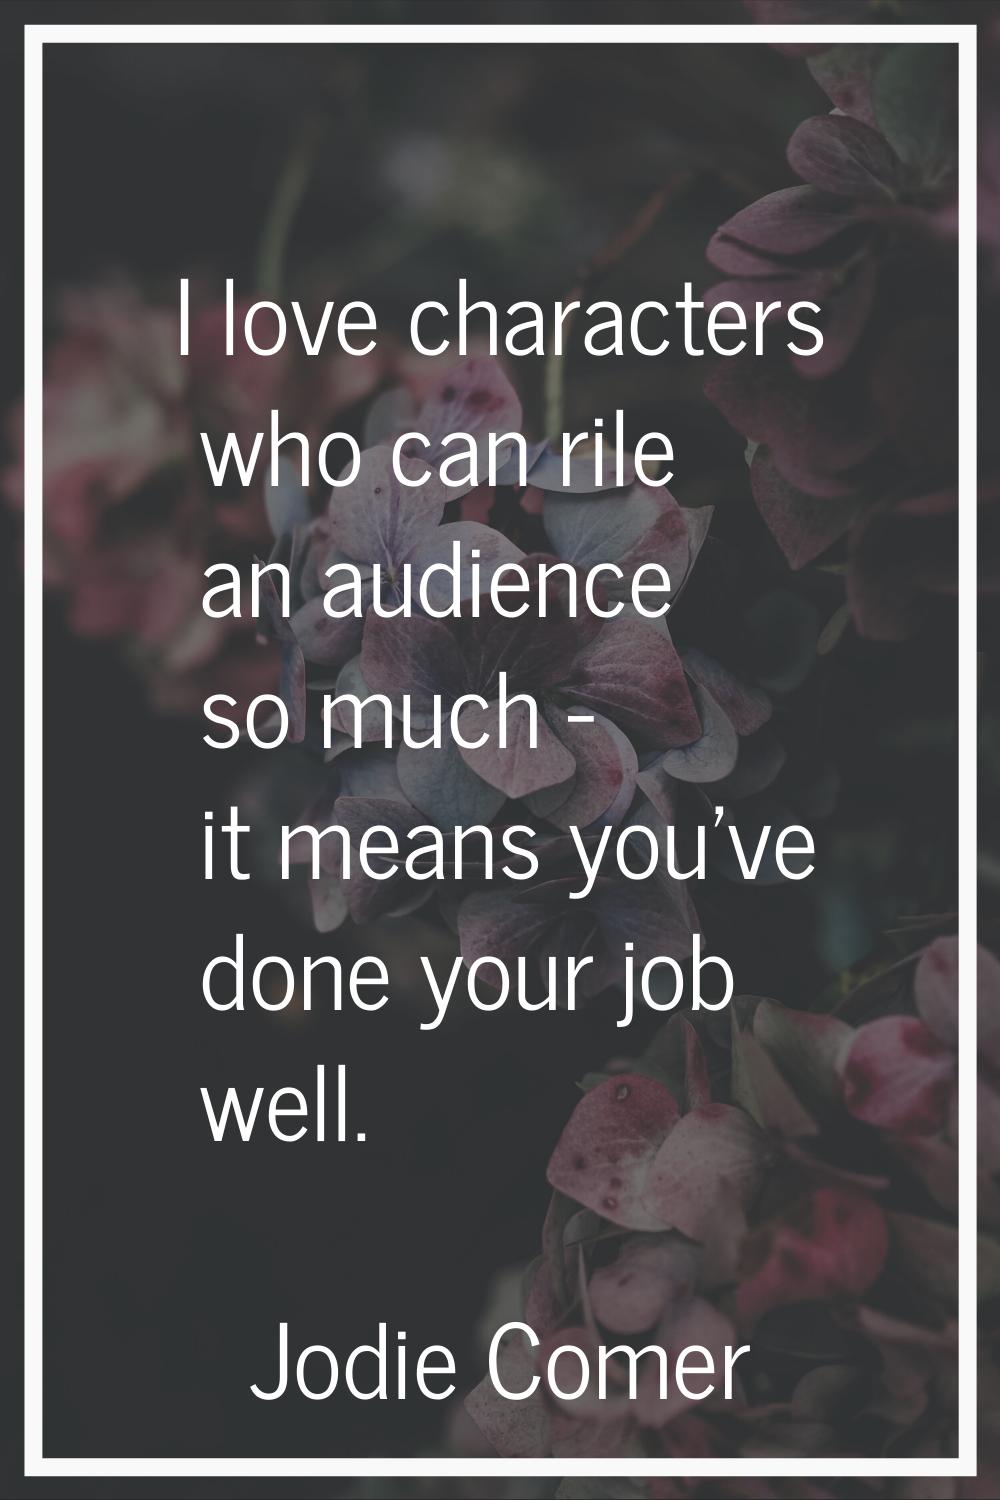 I love characters who can rile an audience so much - it means you've done your job well.